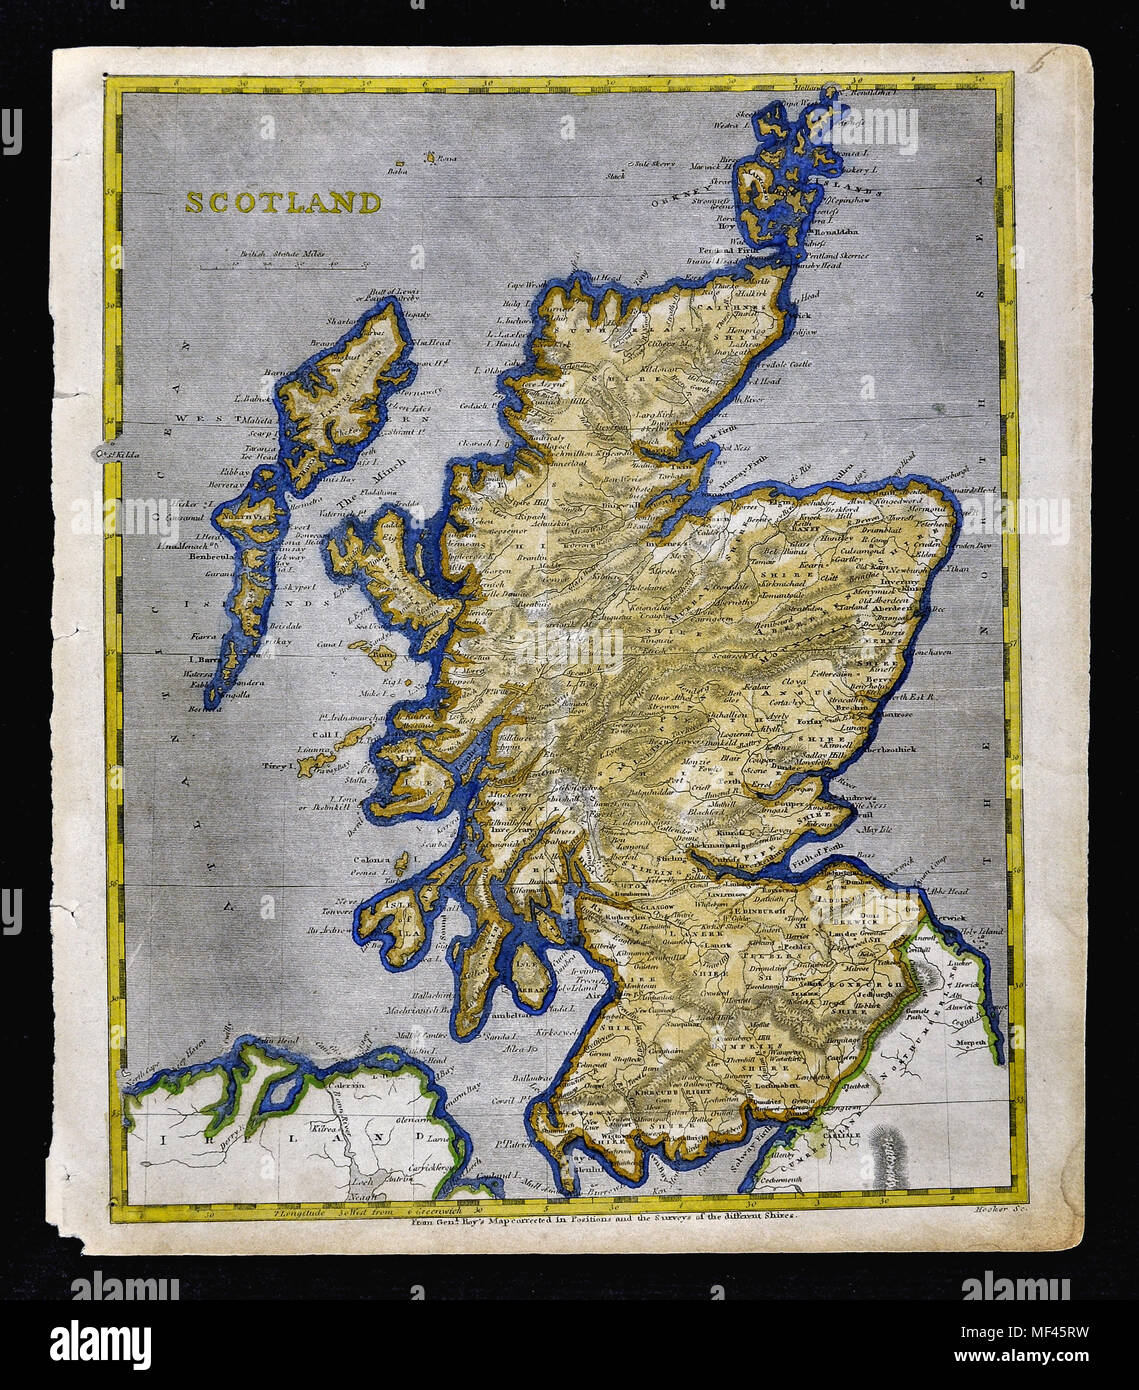 1804 Arrowsmith Site - Ecosse - Edimbourg Glasgow Inverness Loch Ness Orkney Islands Banque D'Images